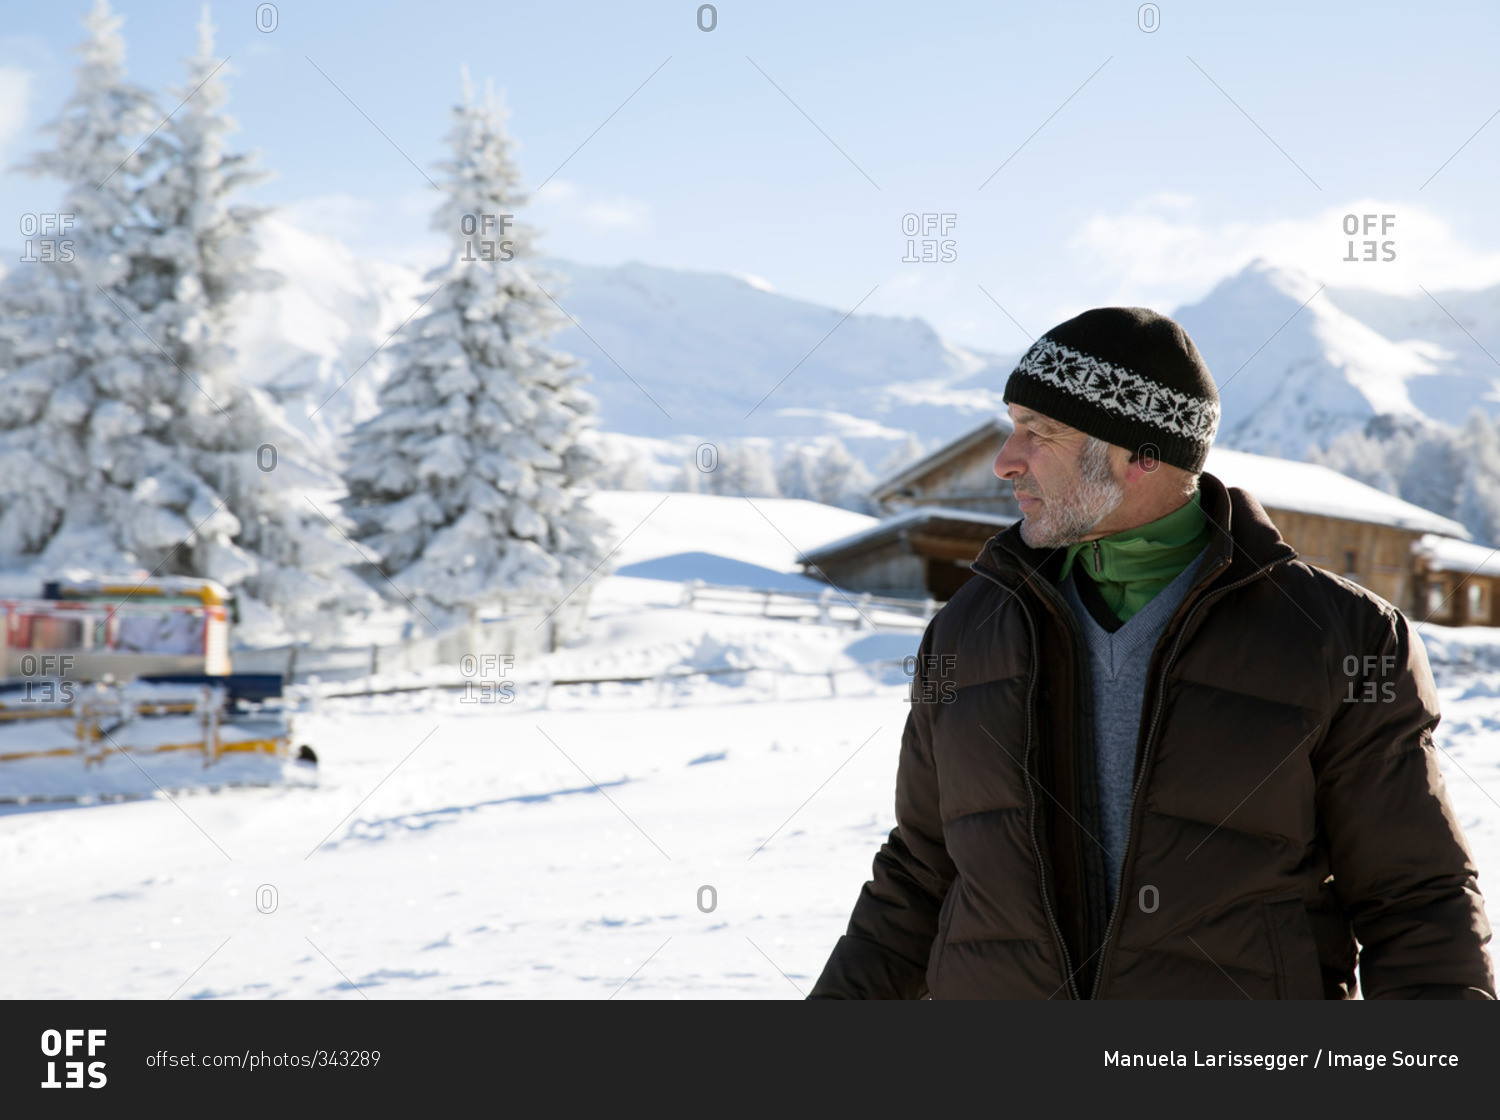 Waist up of senior man and snow covered trees looking away, Sattelbergalm, Tyrol, Austria